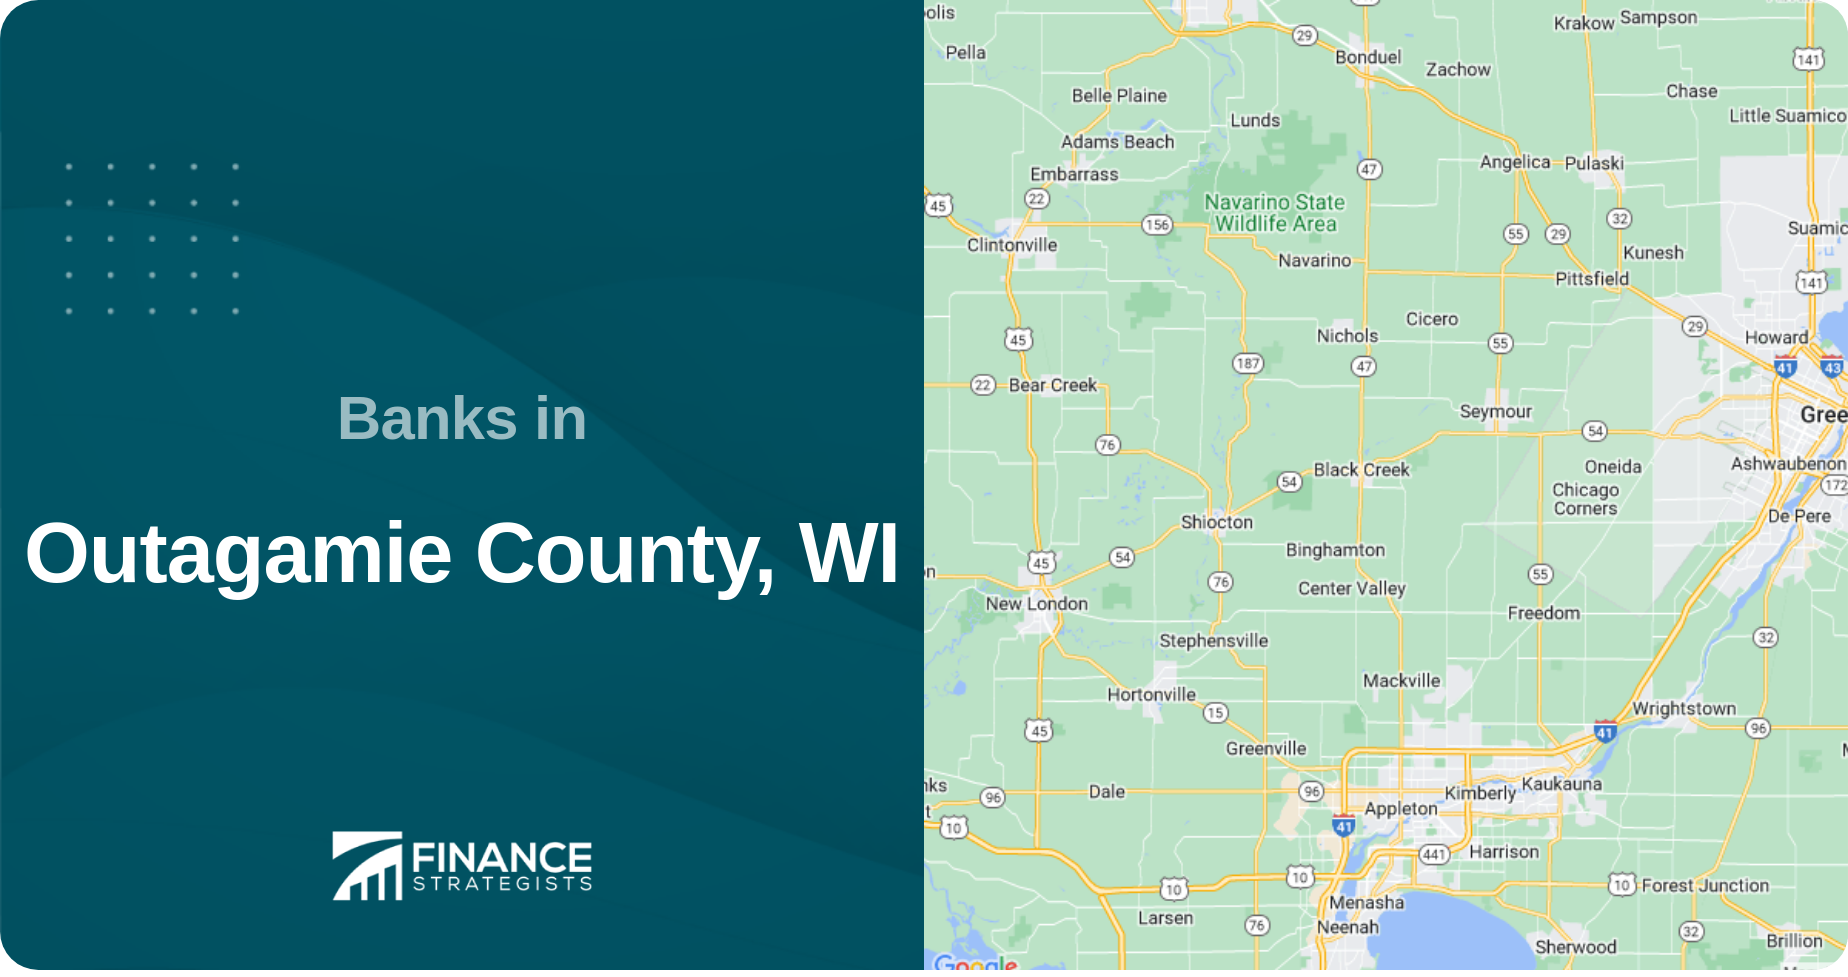 Banks in Outagamie County, WI